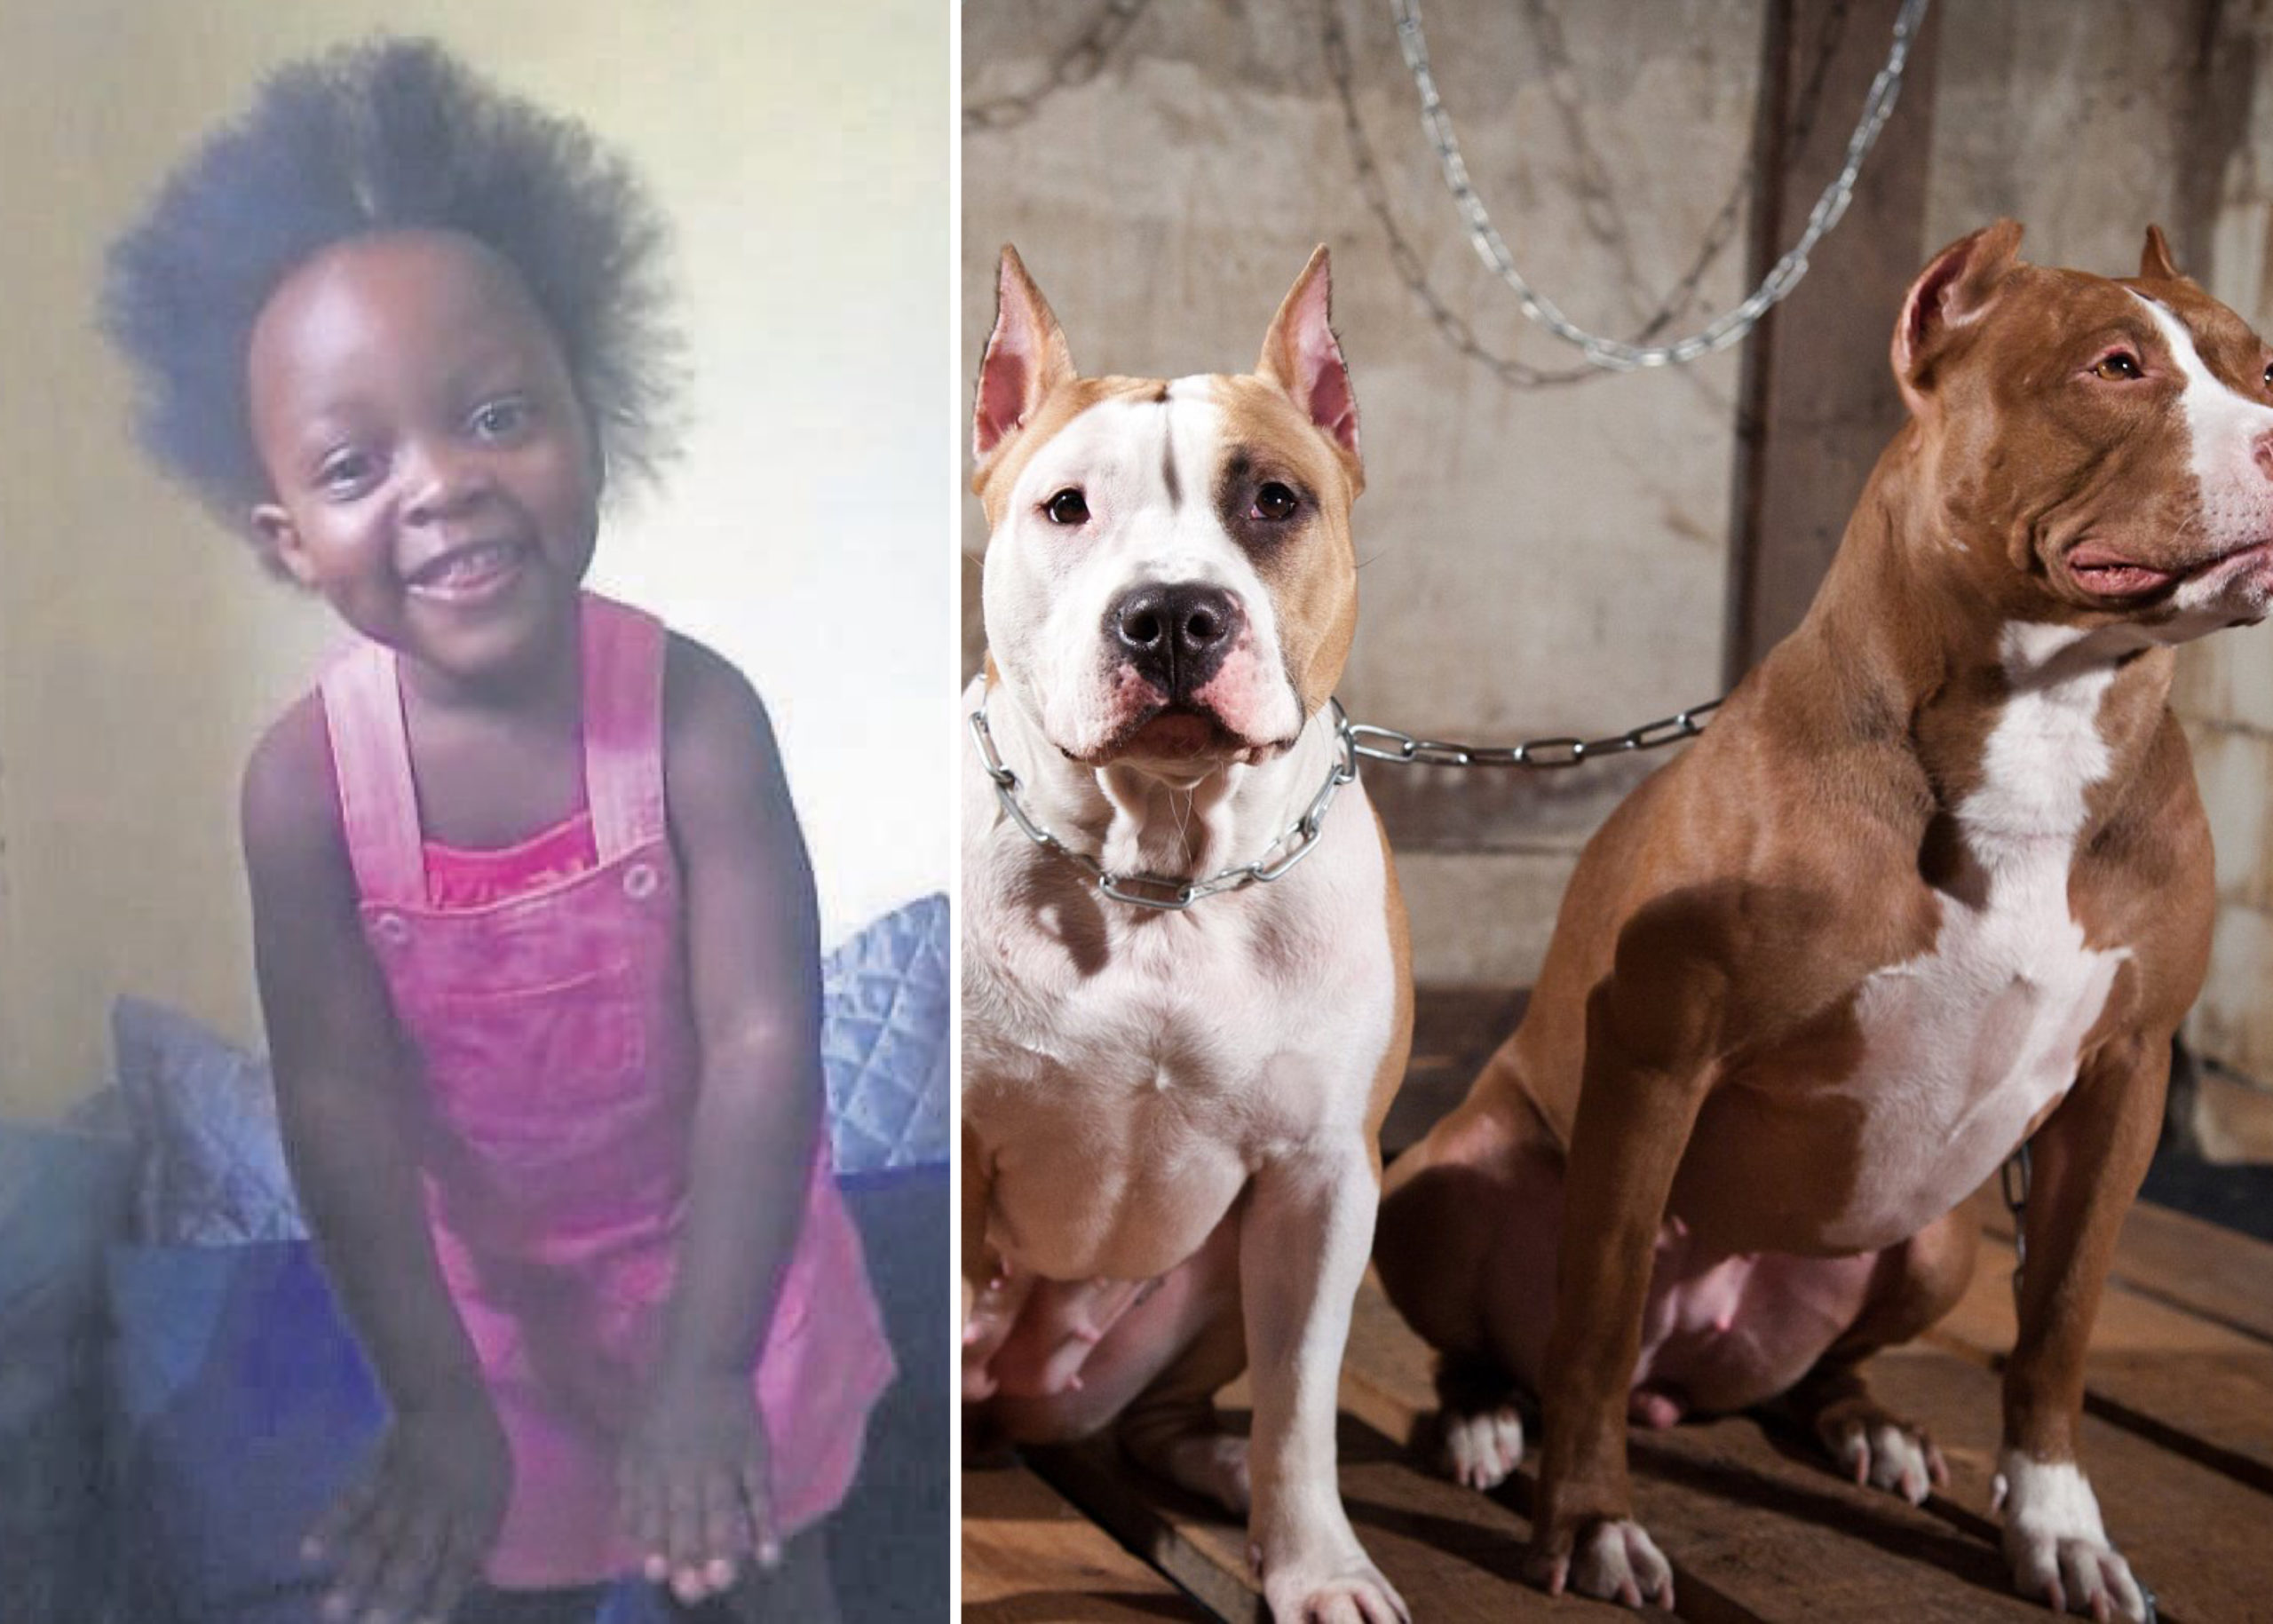 4-Year-Old Girl Mauled To Death By Two Pit Bulls In South Africa